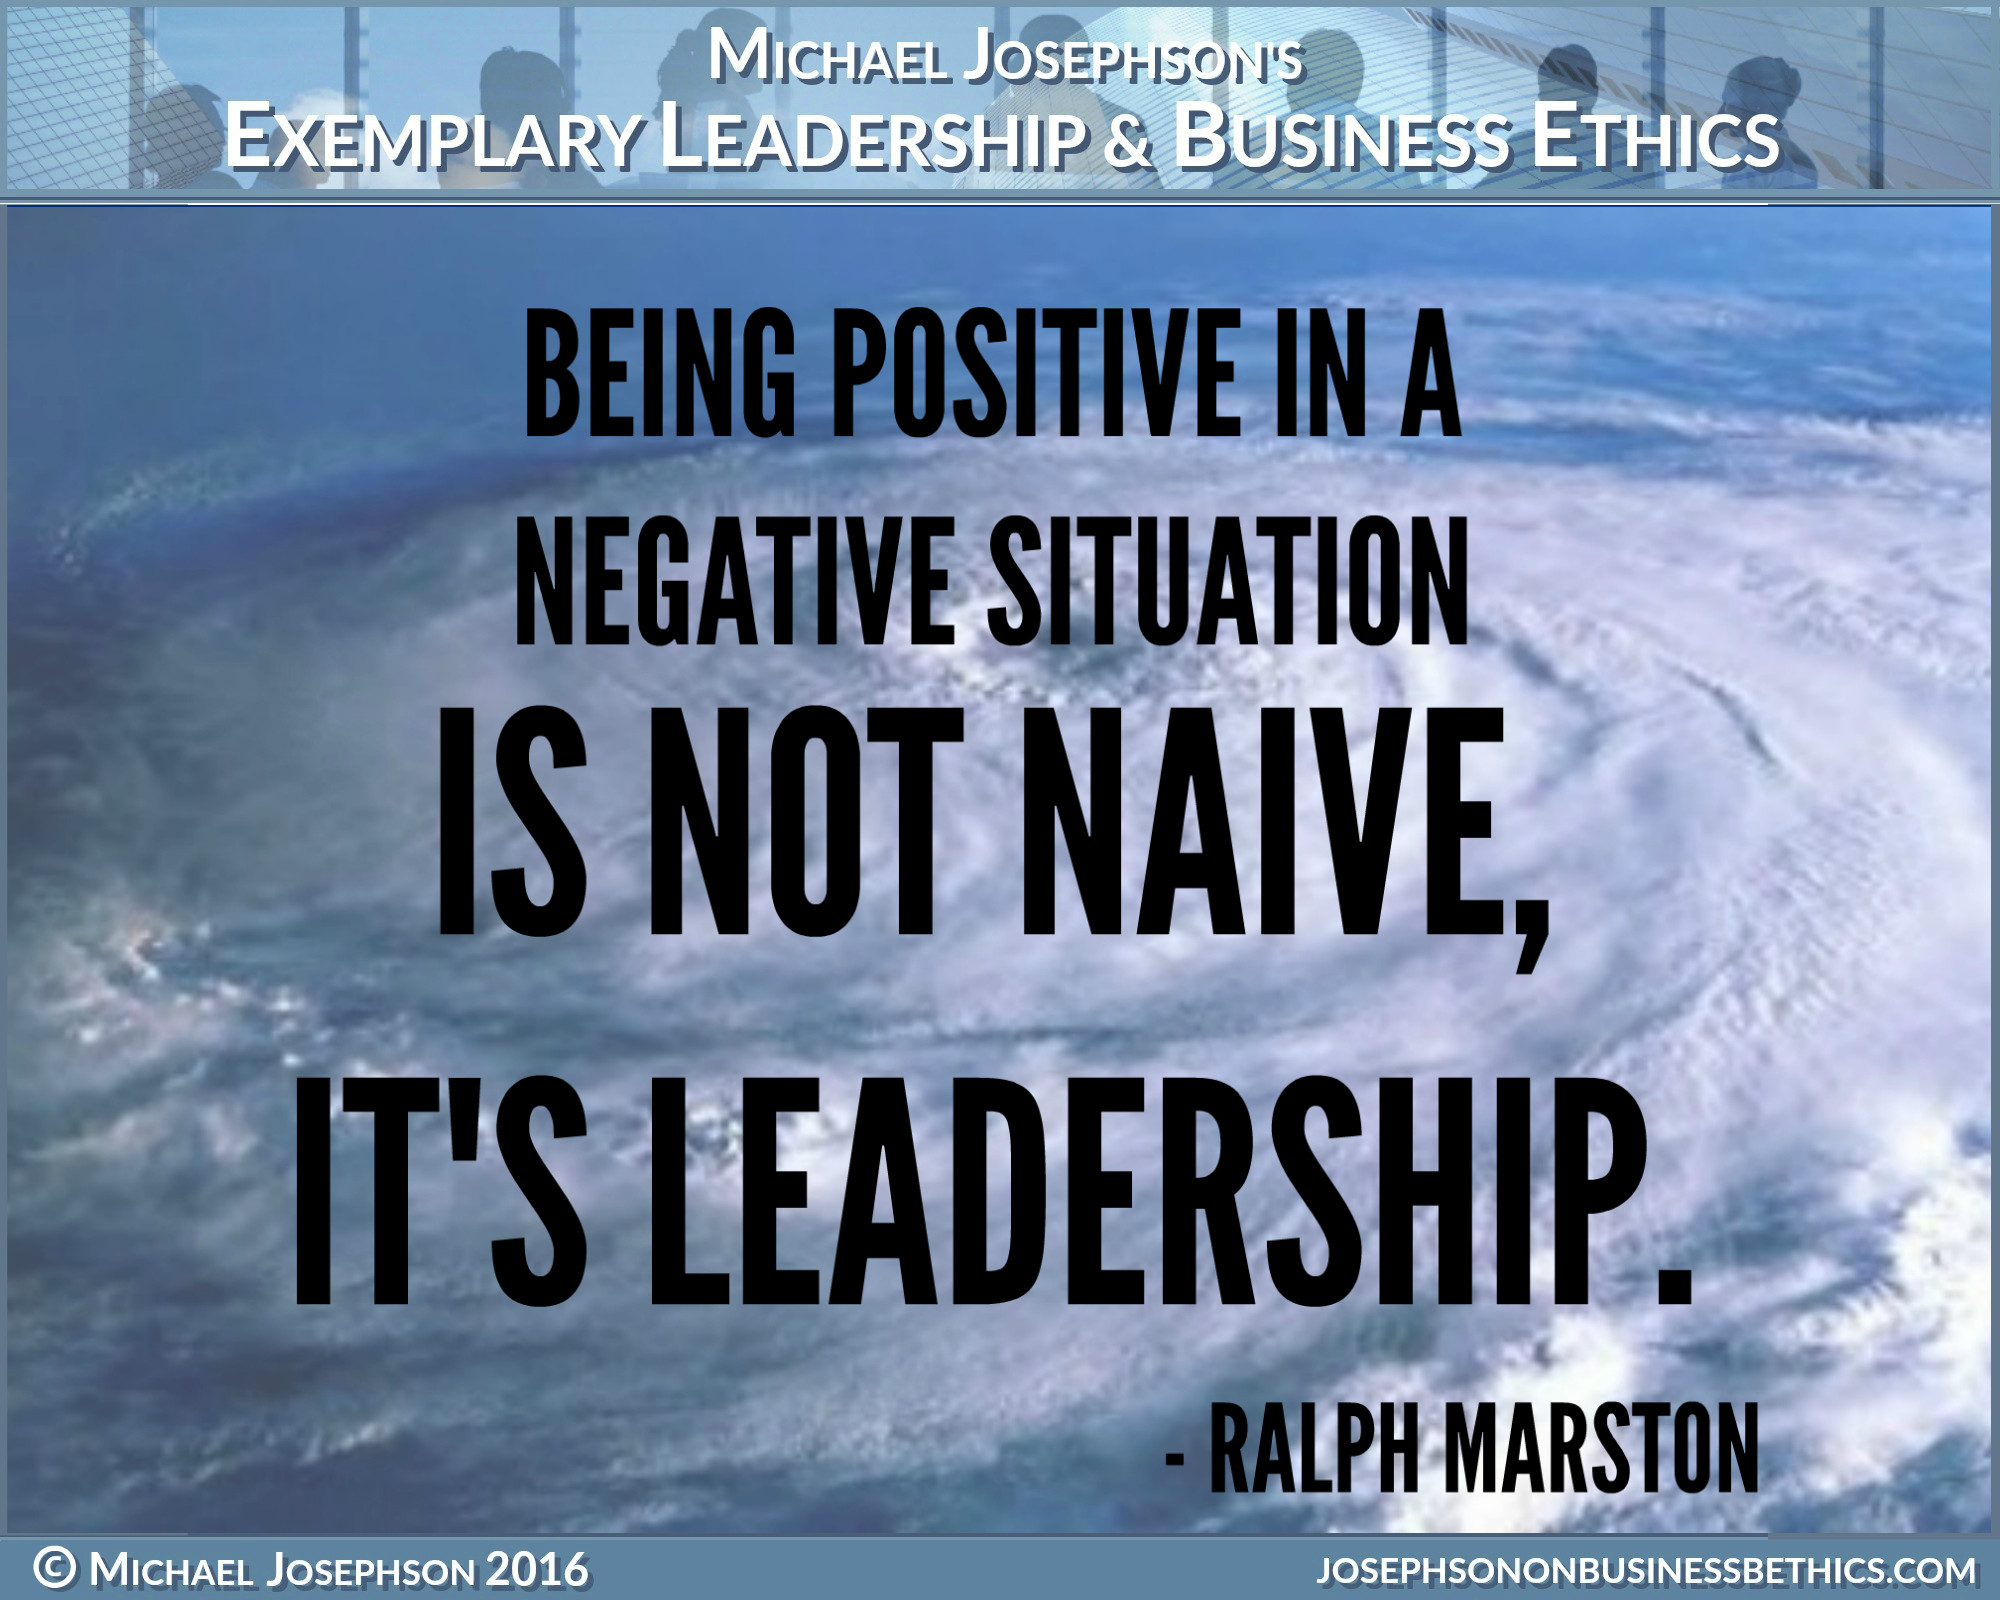 Leadership Quotes Images
 BEST EVER POSTER QUOTES ON LEADERSHIP – What Will Matter